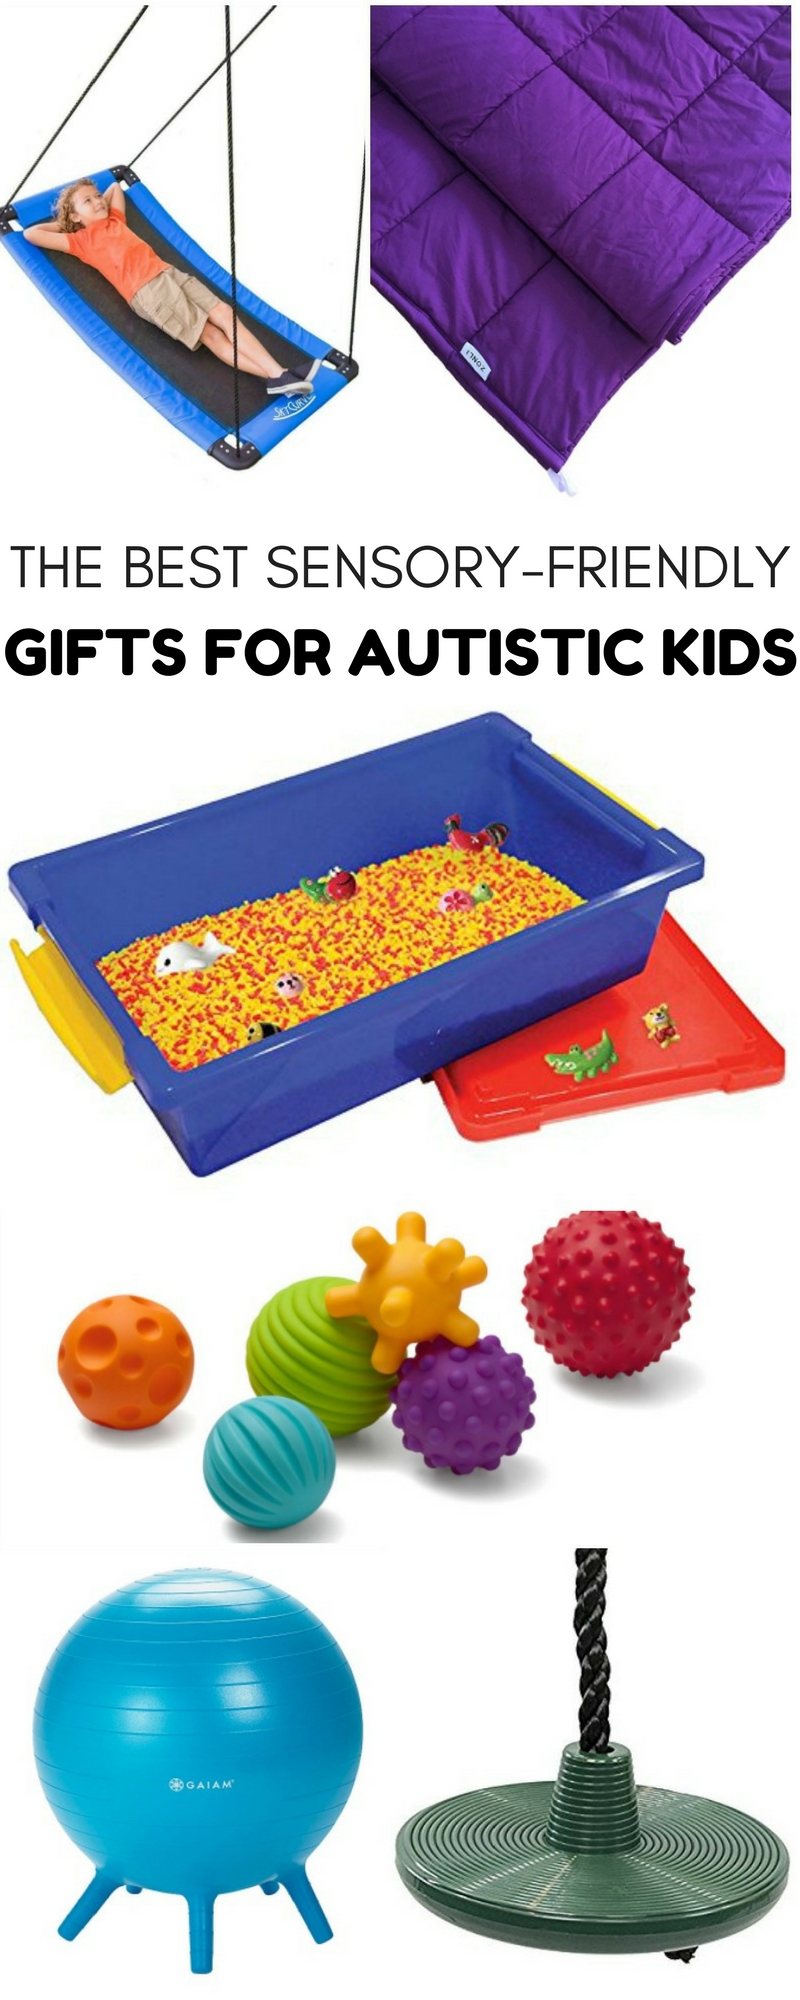 The Best Sensory-Friendly Gifts for Autistic Kids #autism #autistic #autistickids #Christmas #gifts #sensoryfriendly #sensory